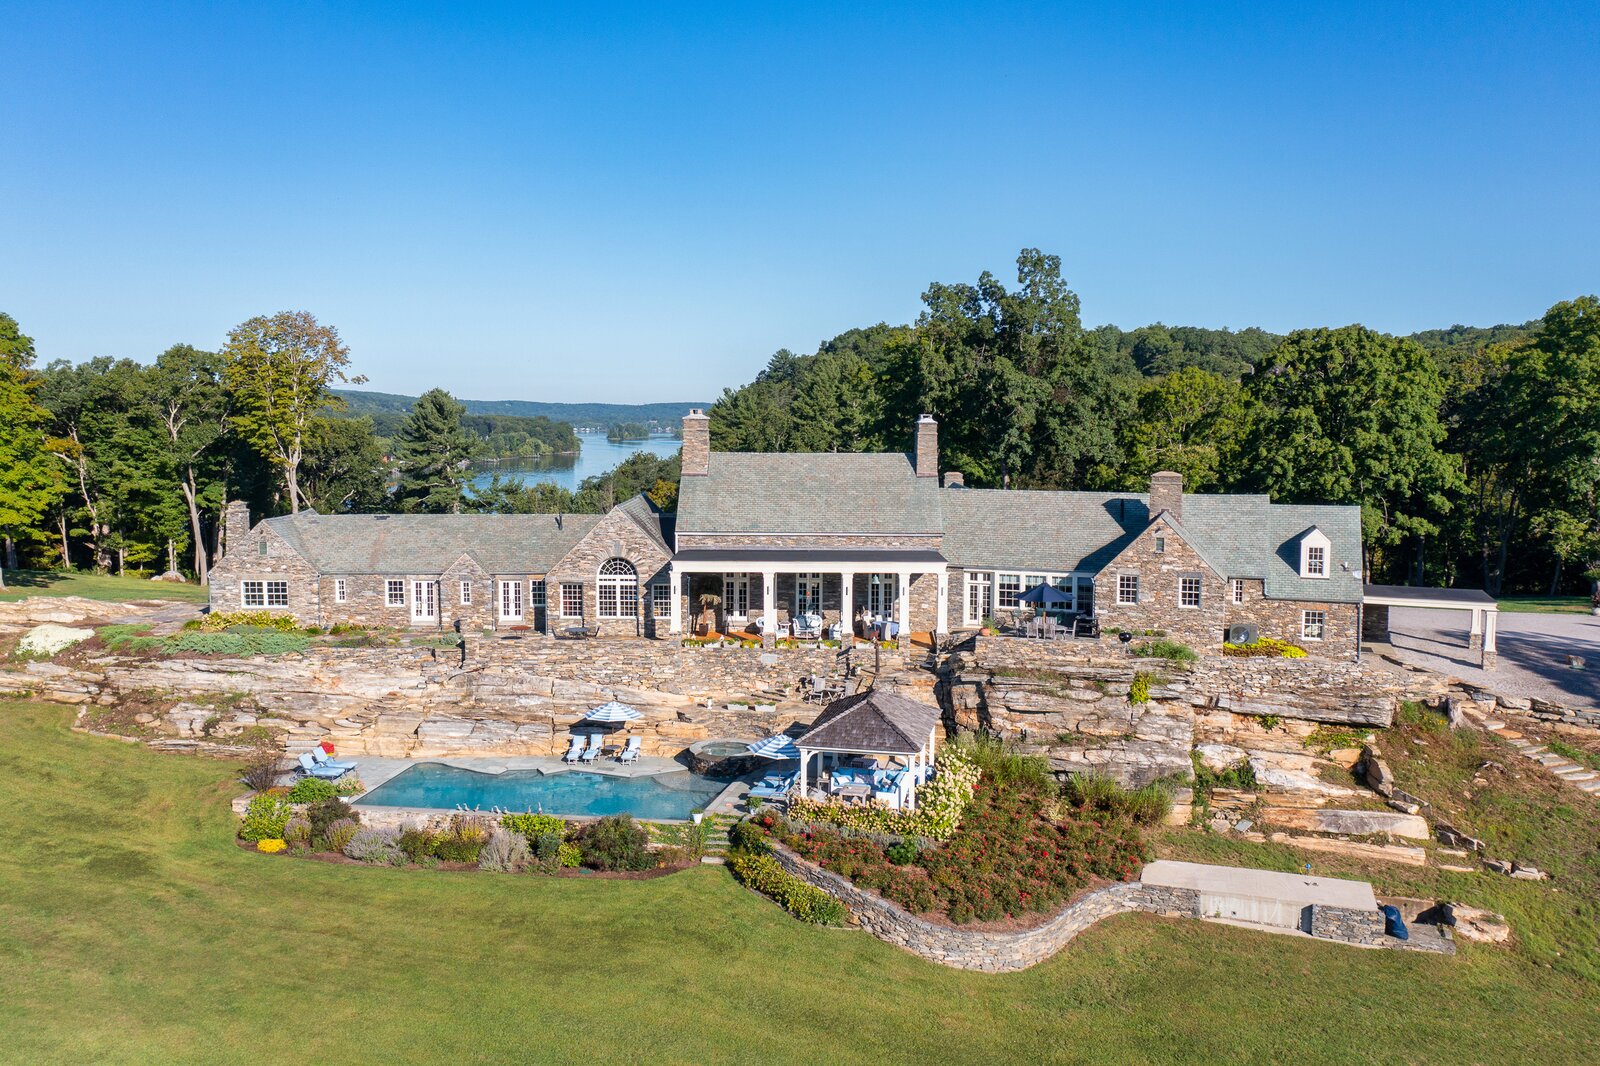 Stone Walls and Rose Bushes Surround a Classic Connecticut Estate That's Listed for $15M